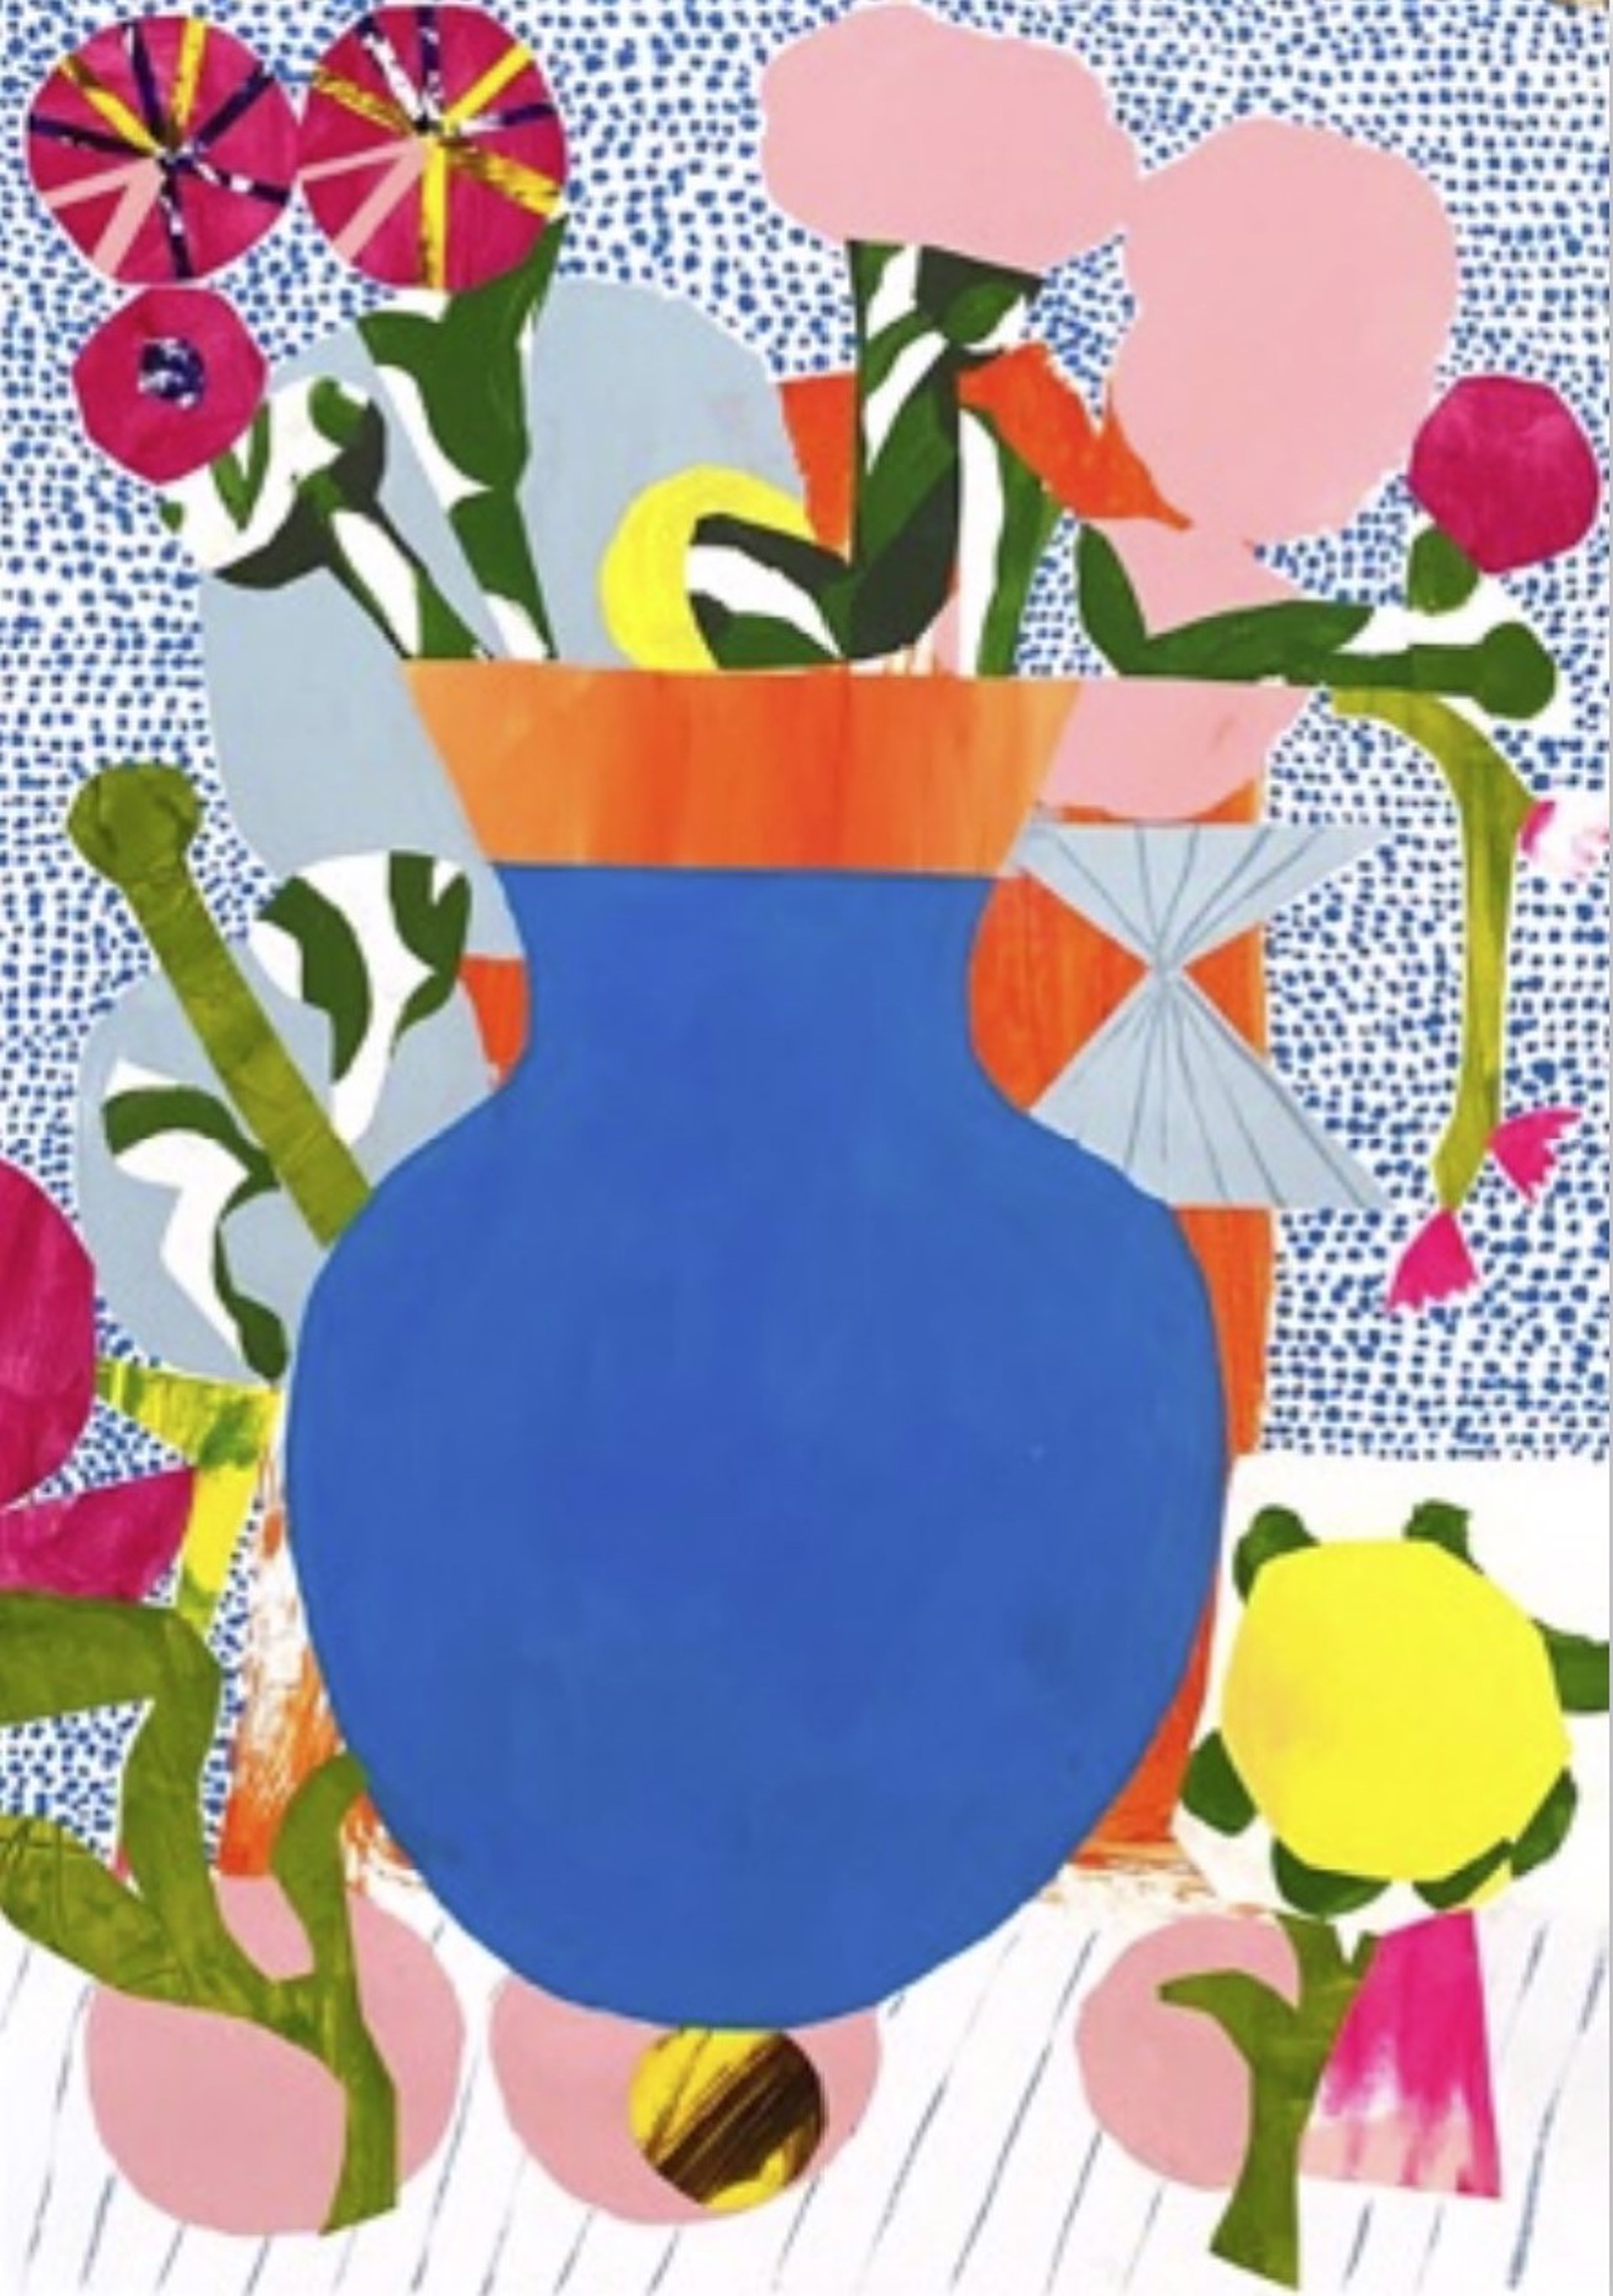 Vase and Flowers II by Maria Lundström